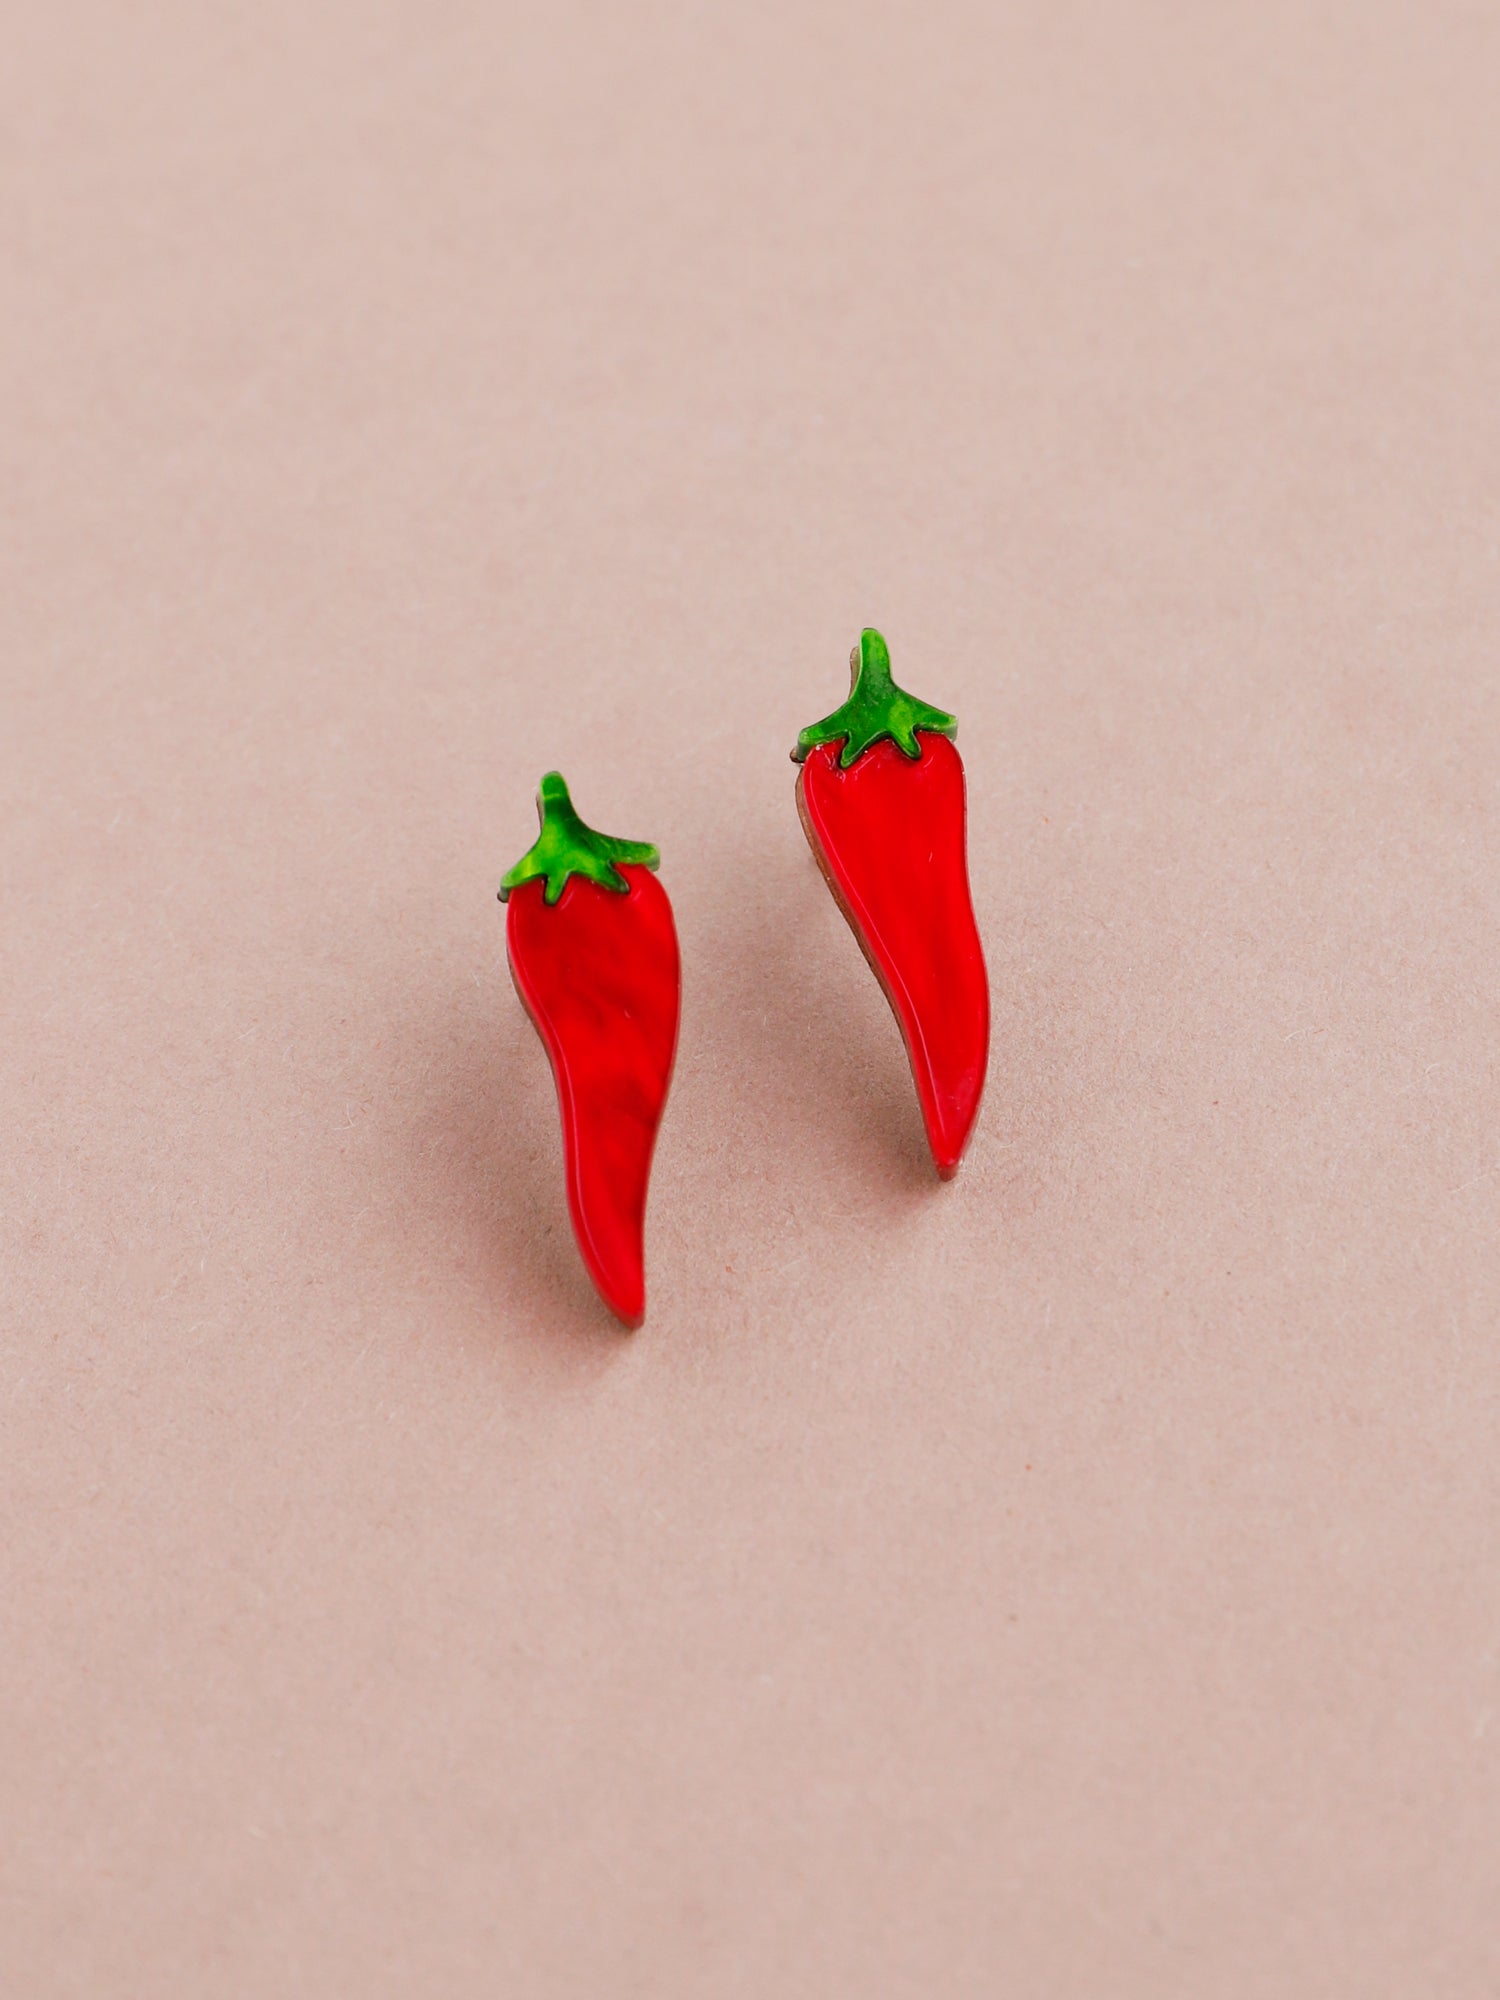 Red chilli pepper acrylic studs with green stalk. Handmade in London by Wolf & Moon.